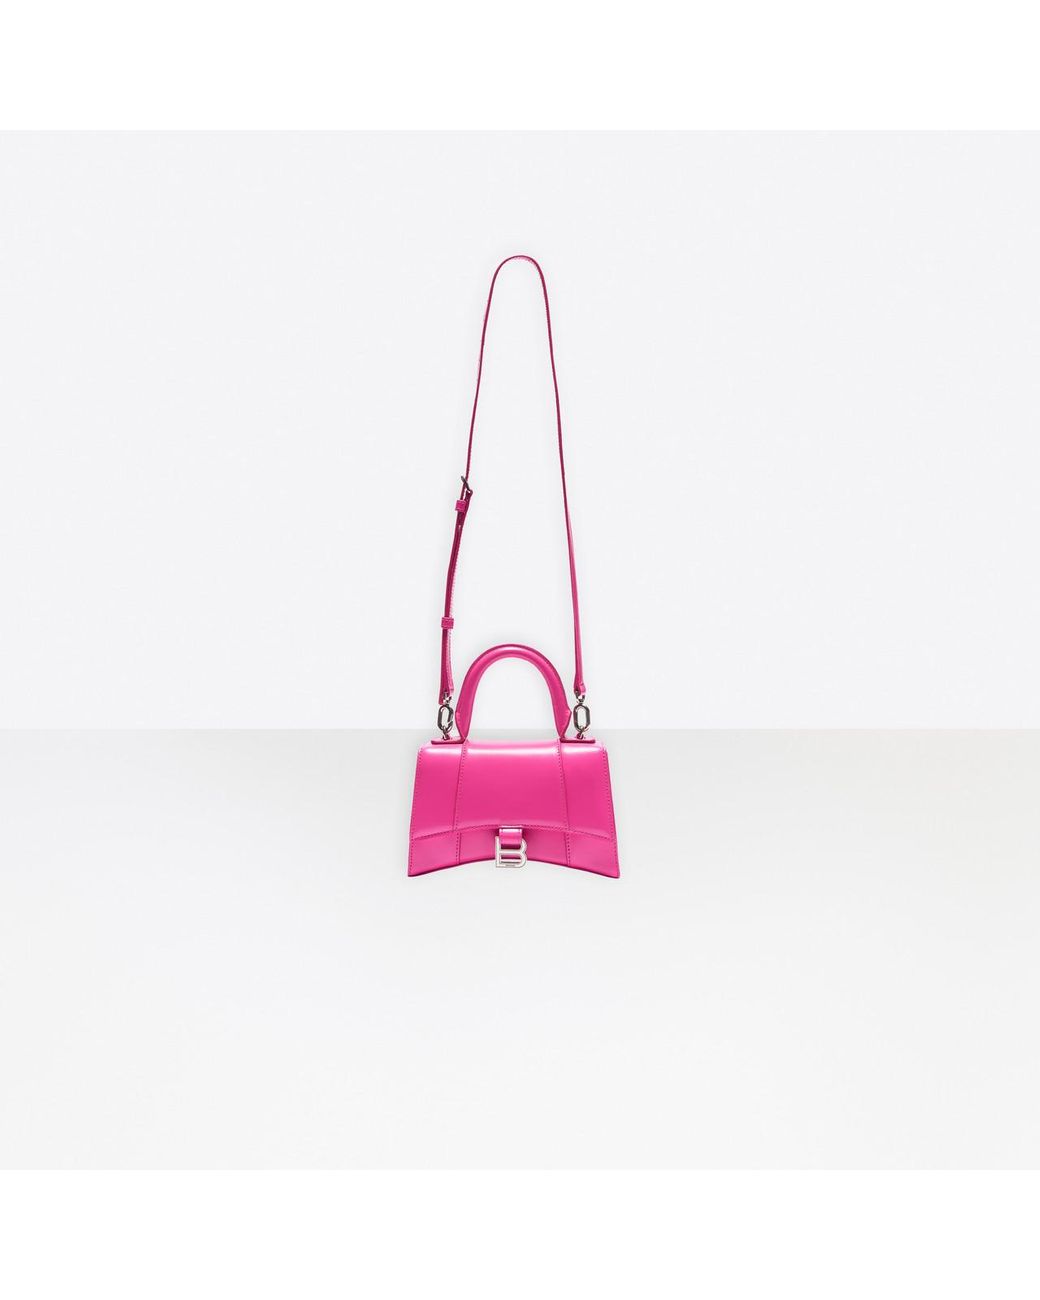 Balenciaga Hourglass XS tophandle bag for Women  Pink in UAE  Level Shoes